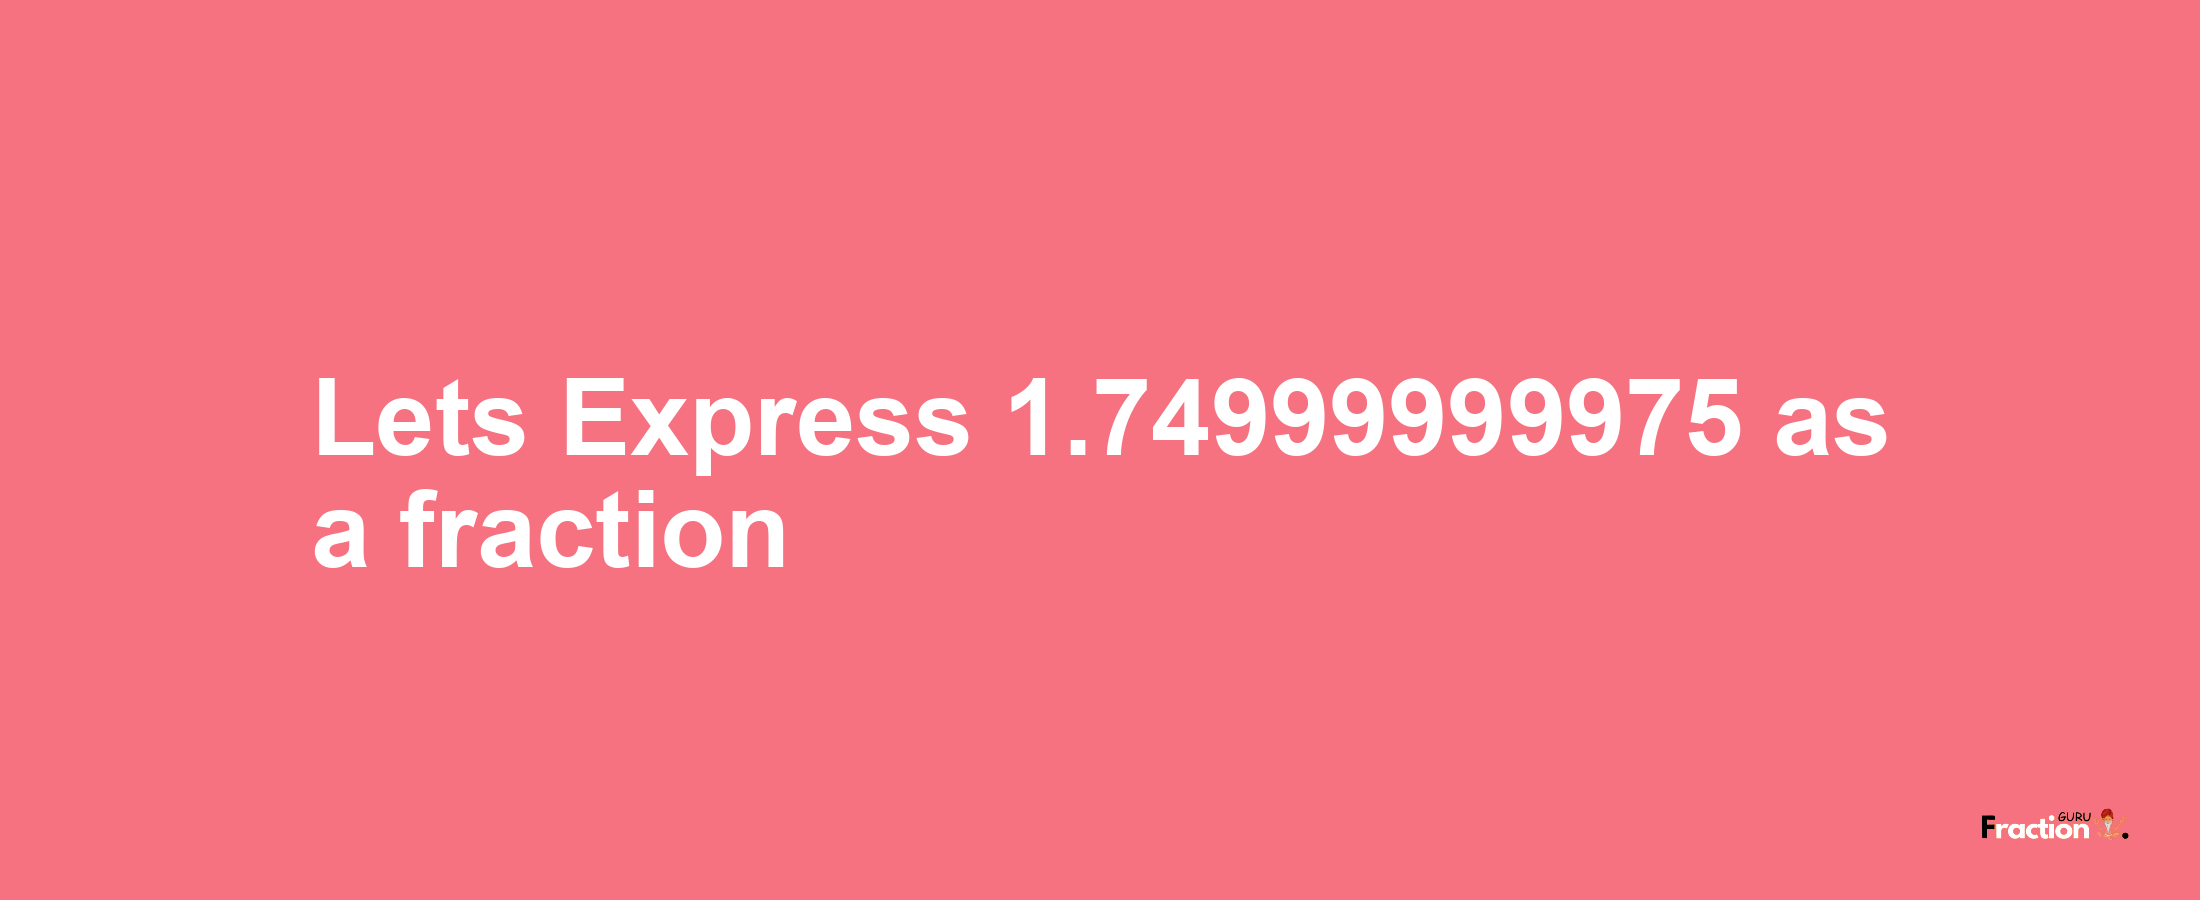 Lets Express 1.74999999975 as afraction